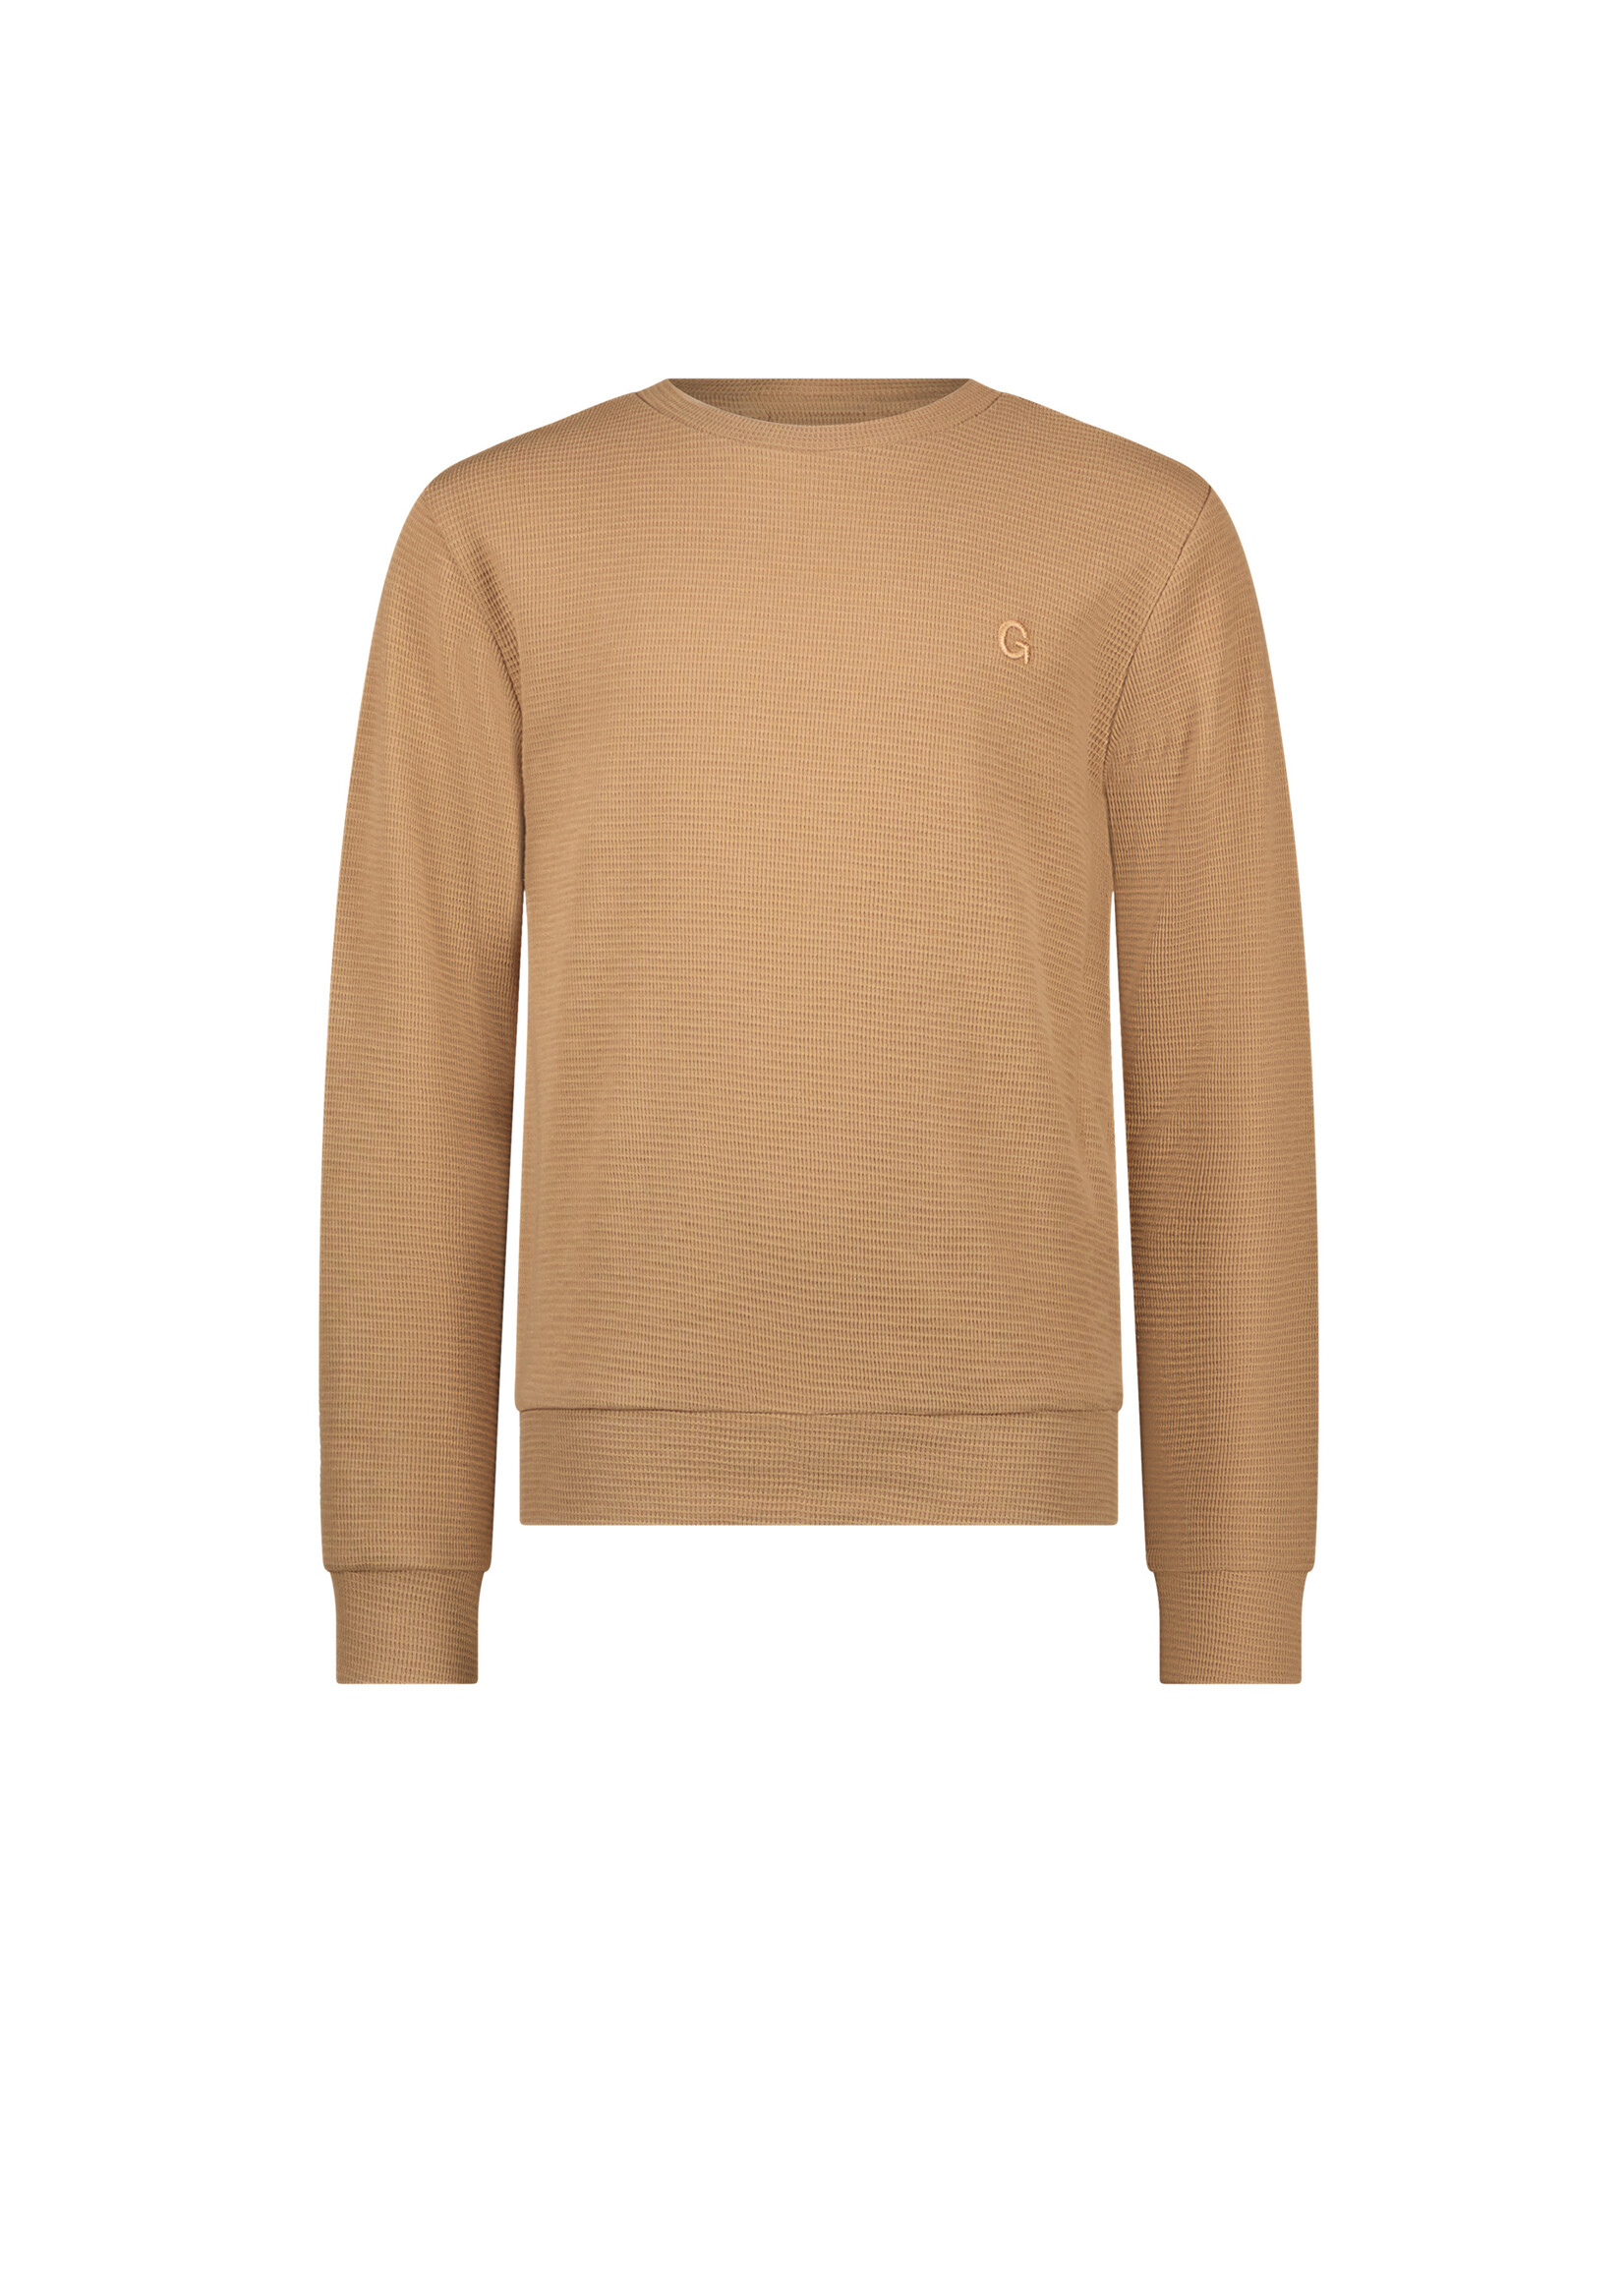 le chic garcon oliver sweater